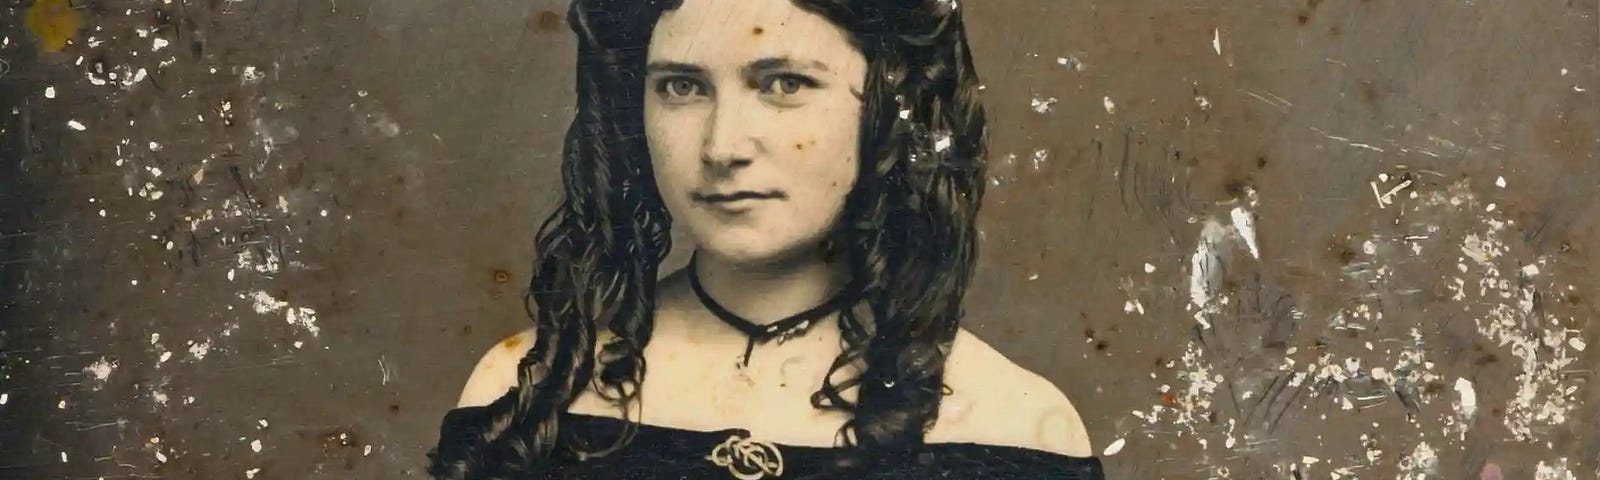 Photograph of a woman recovered from the 1857 wreck of the SS Central America known as the Mona Lisa of the Depths.